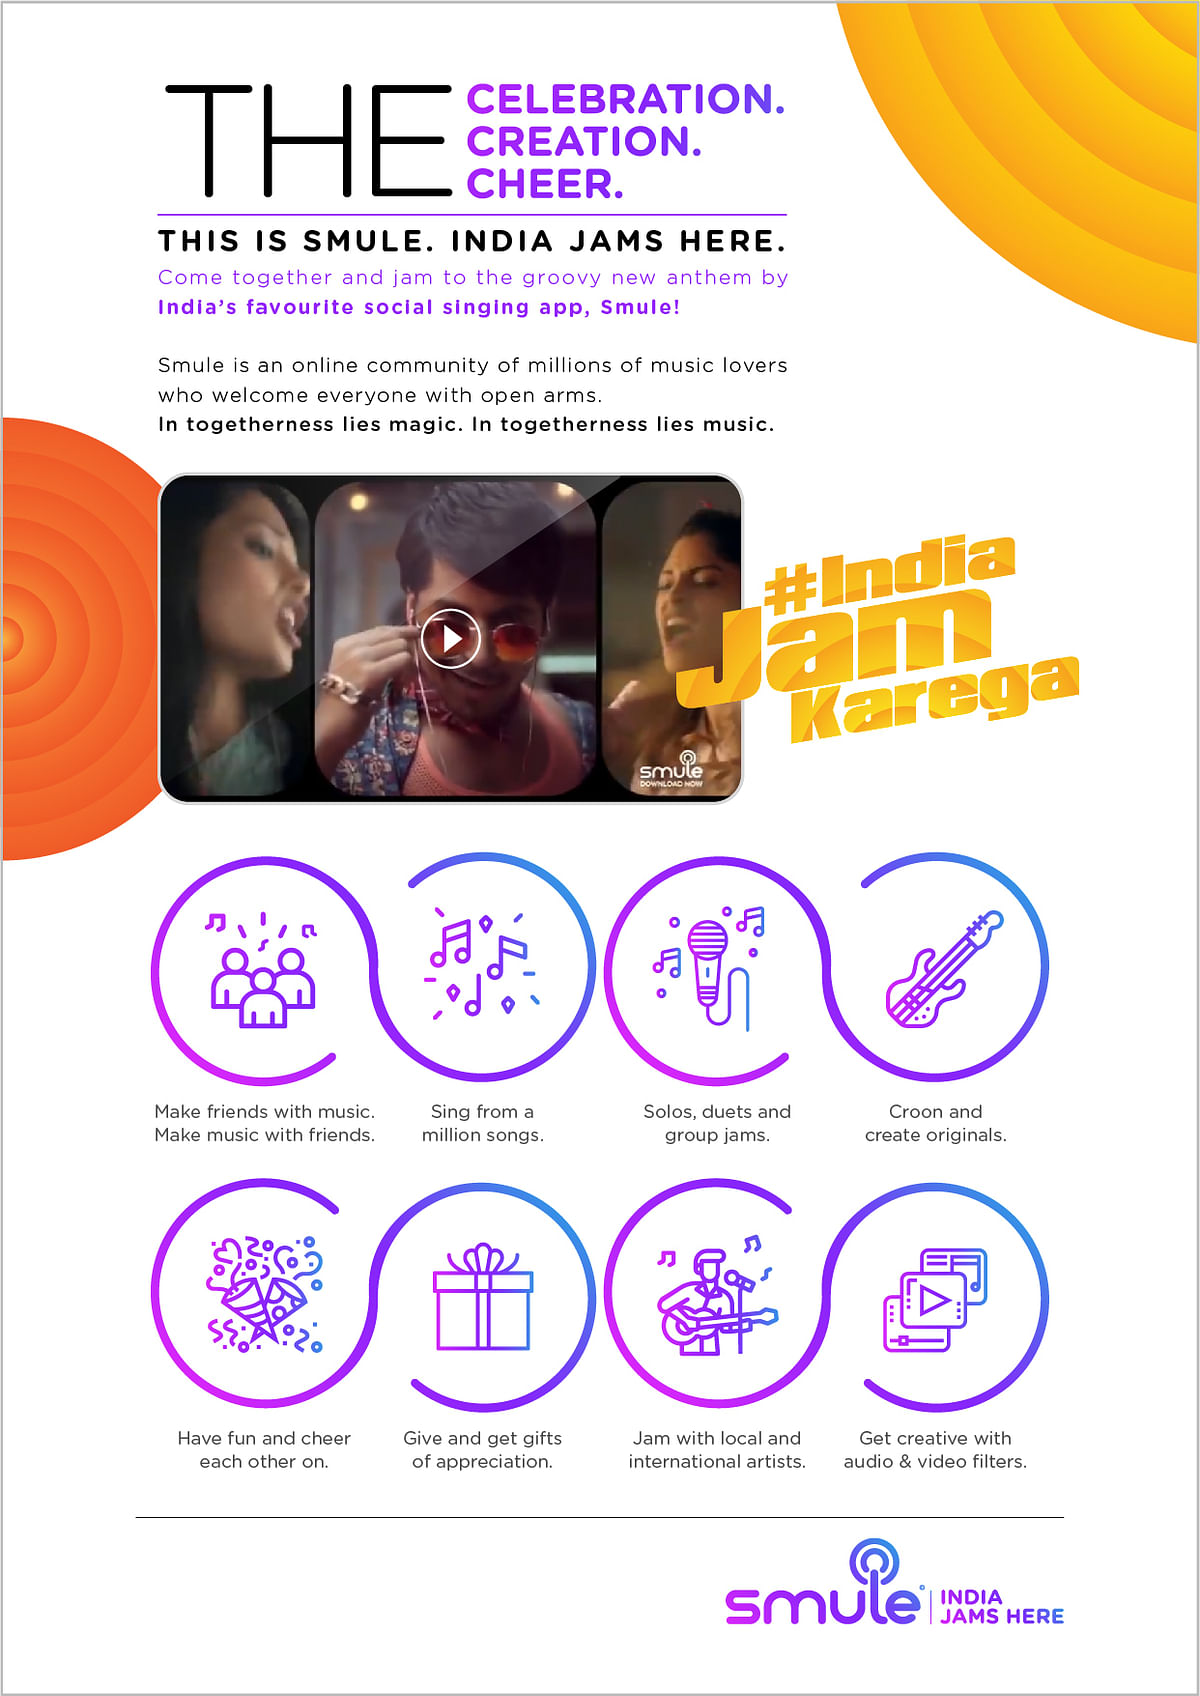 Smule’s ‘India Jam Karega’ calls for unity over shared passion for music